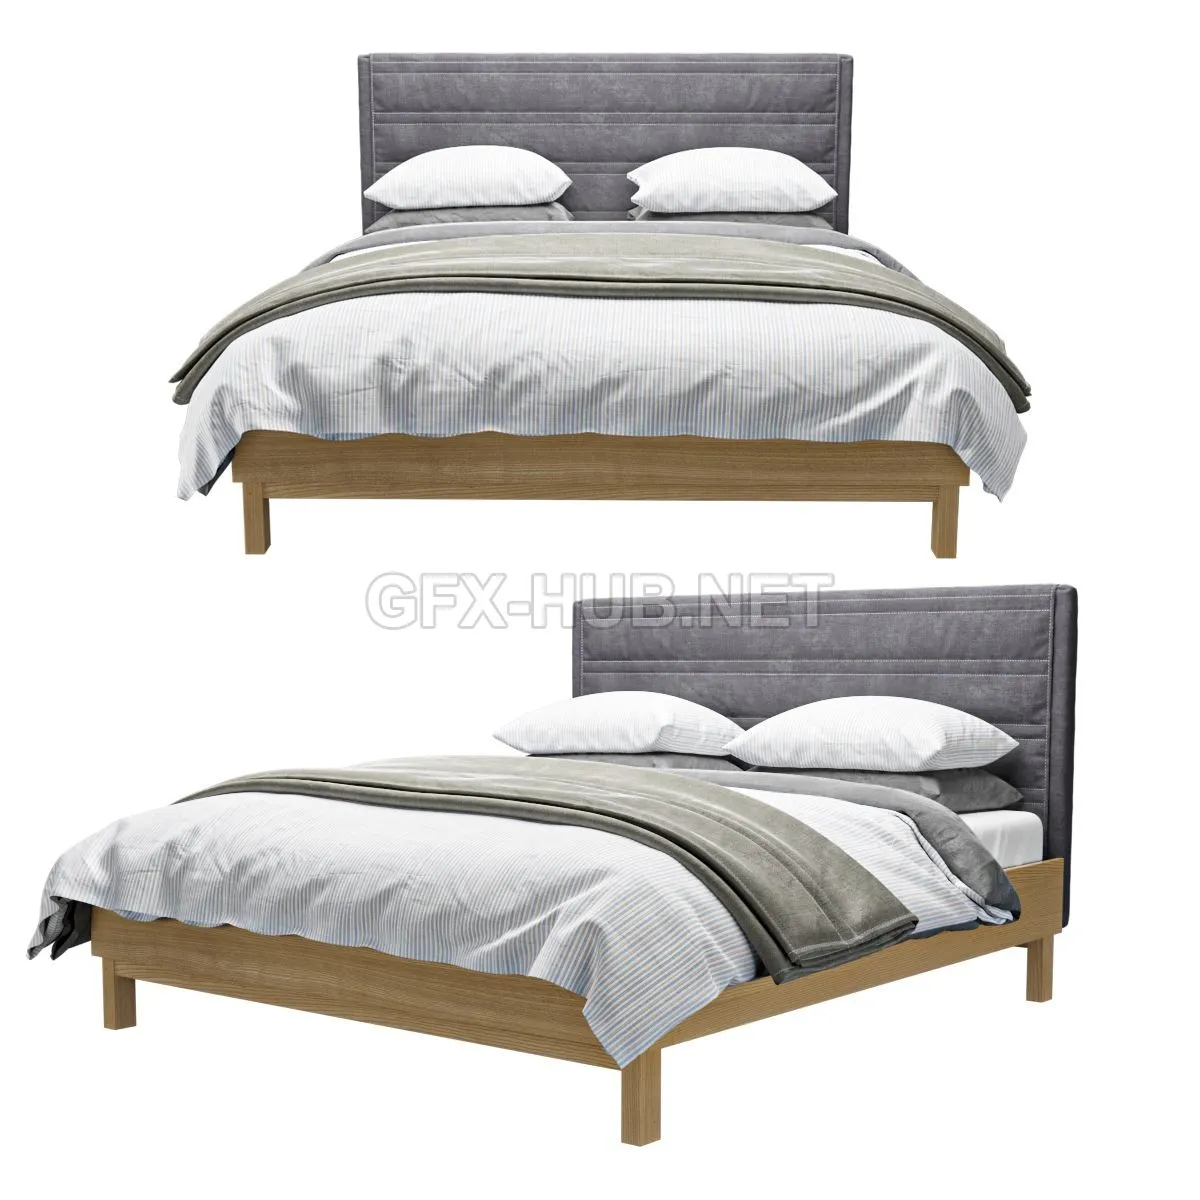 Bed Oppland – 207745